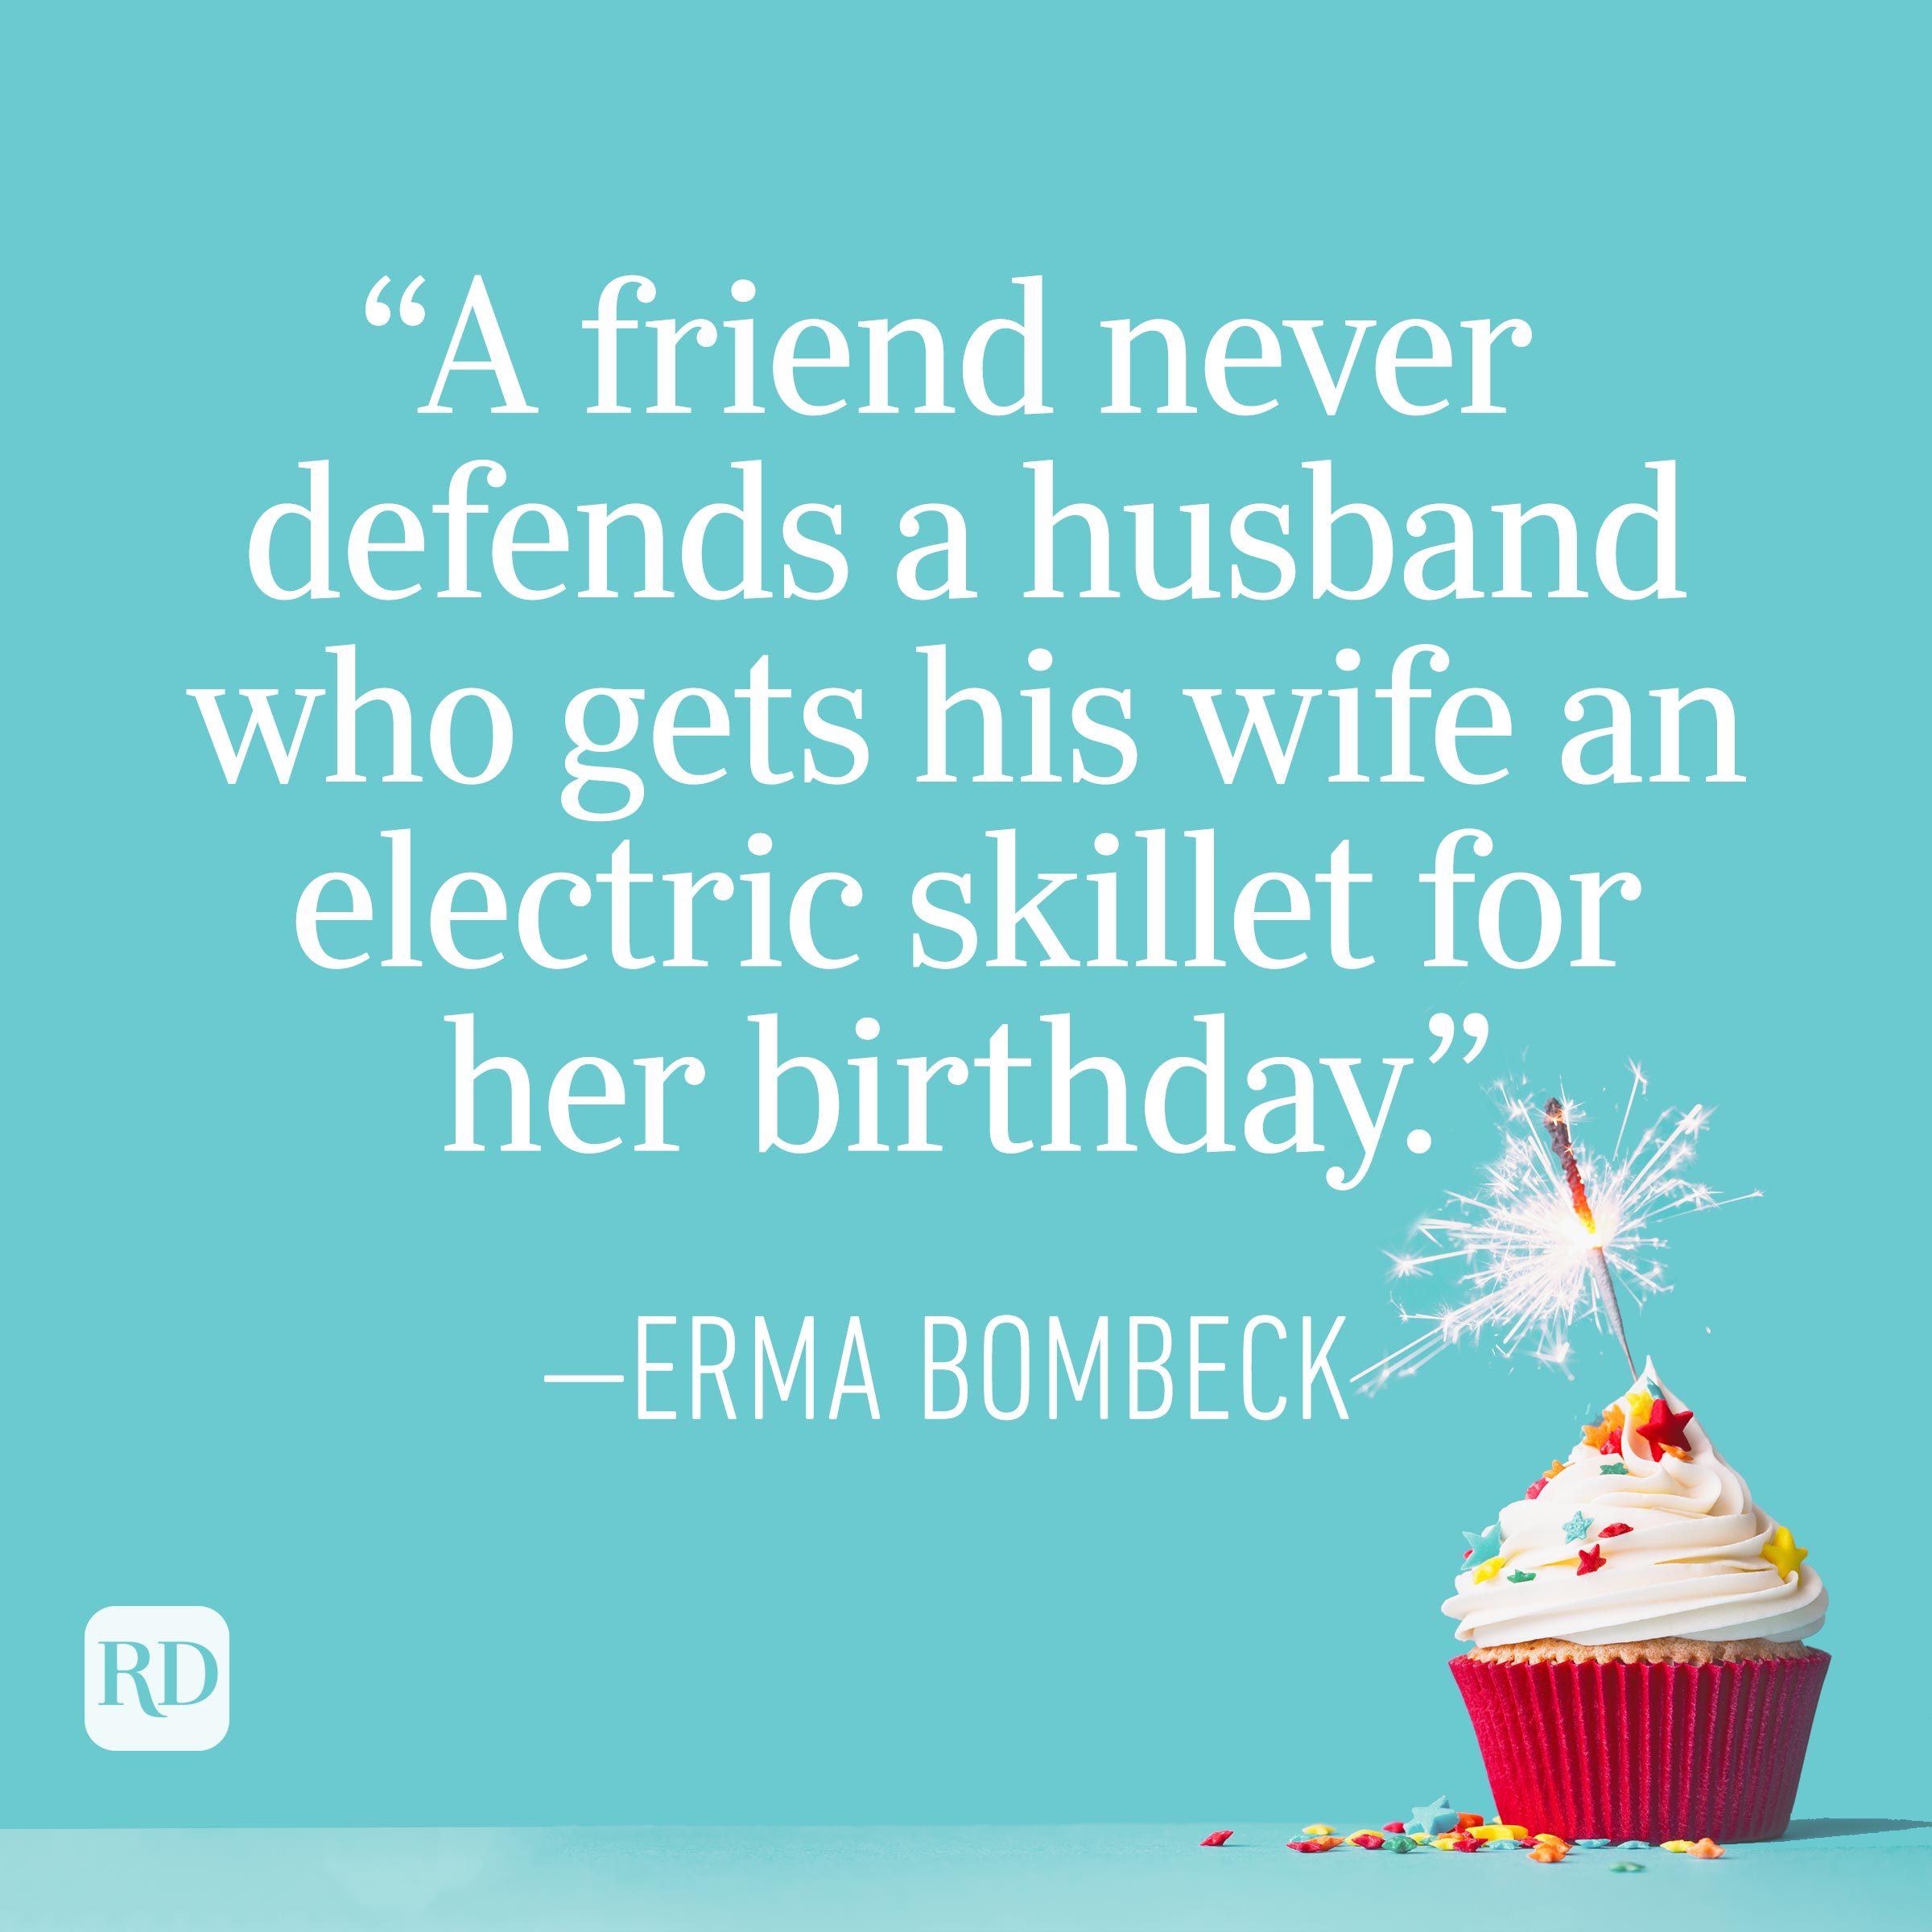 "A friend never defends a husband who gets his wife an electric skillet for her birthday." —Erma Bombeck